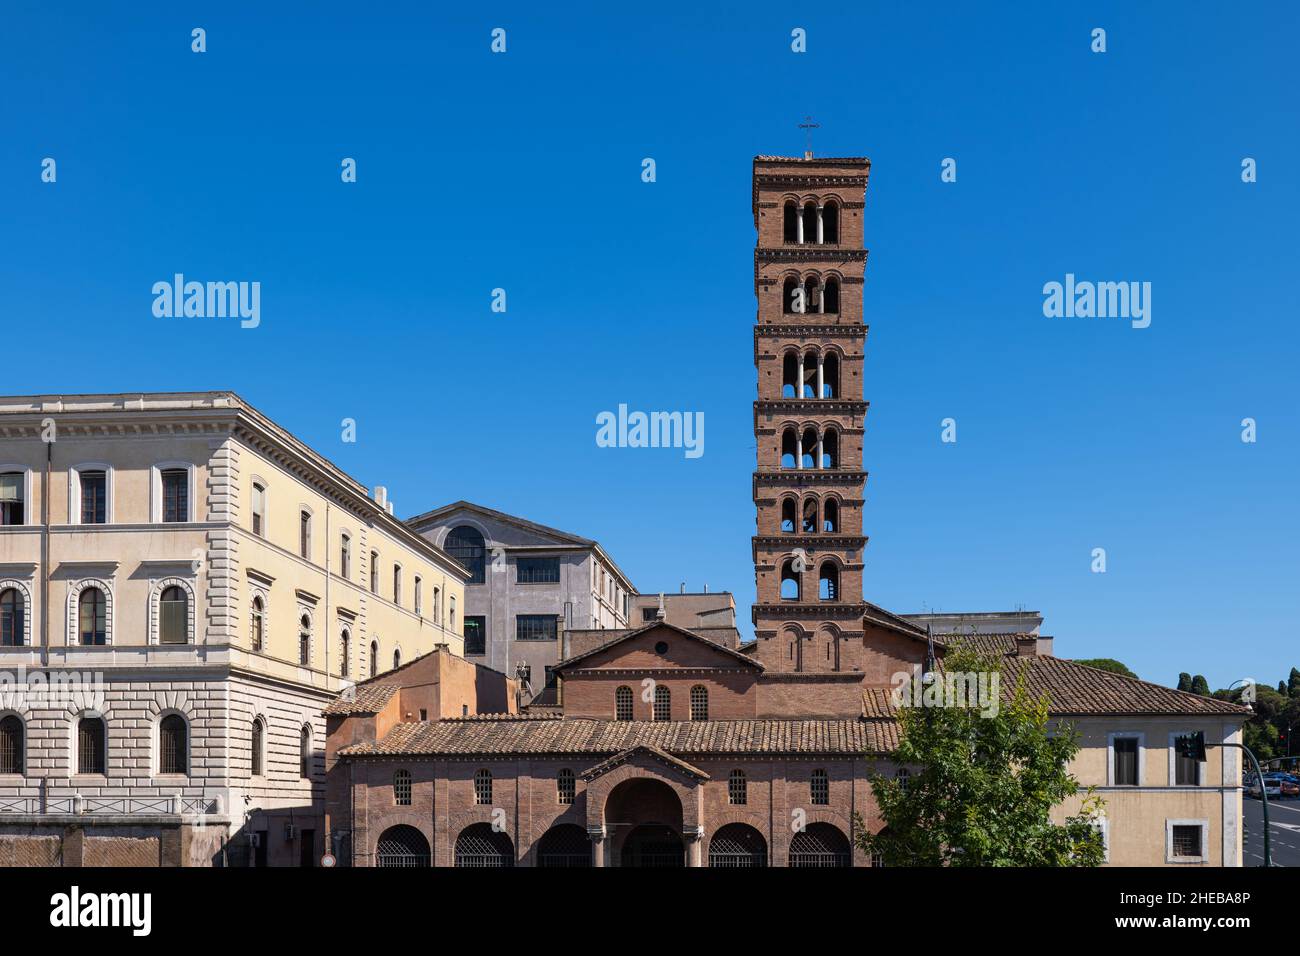 Basilica of Saint Mary in Cosmedin with medieval bell tower in Rome, Italy. Stock Photo